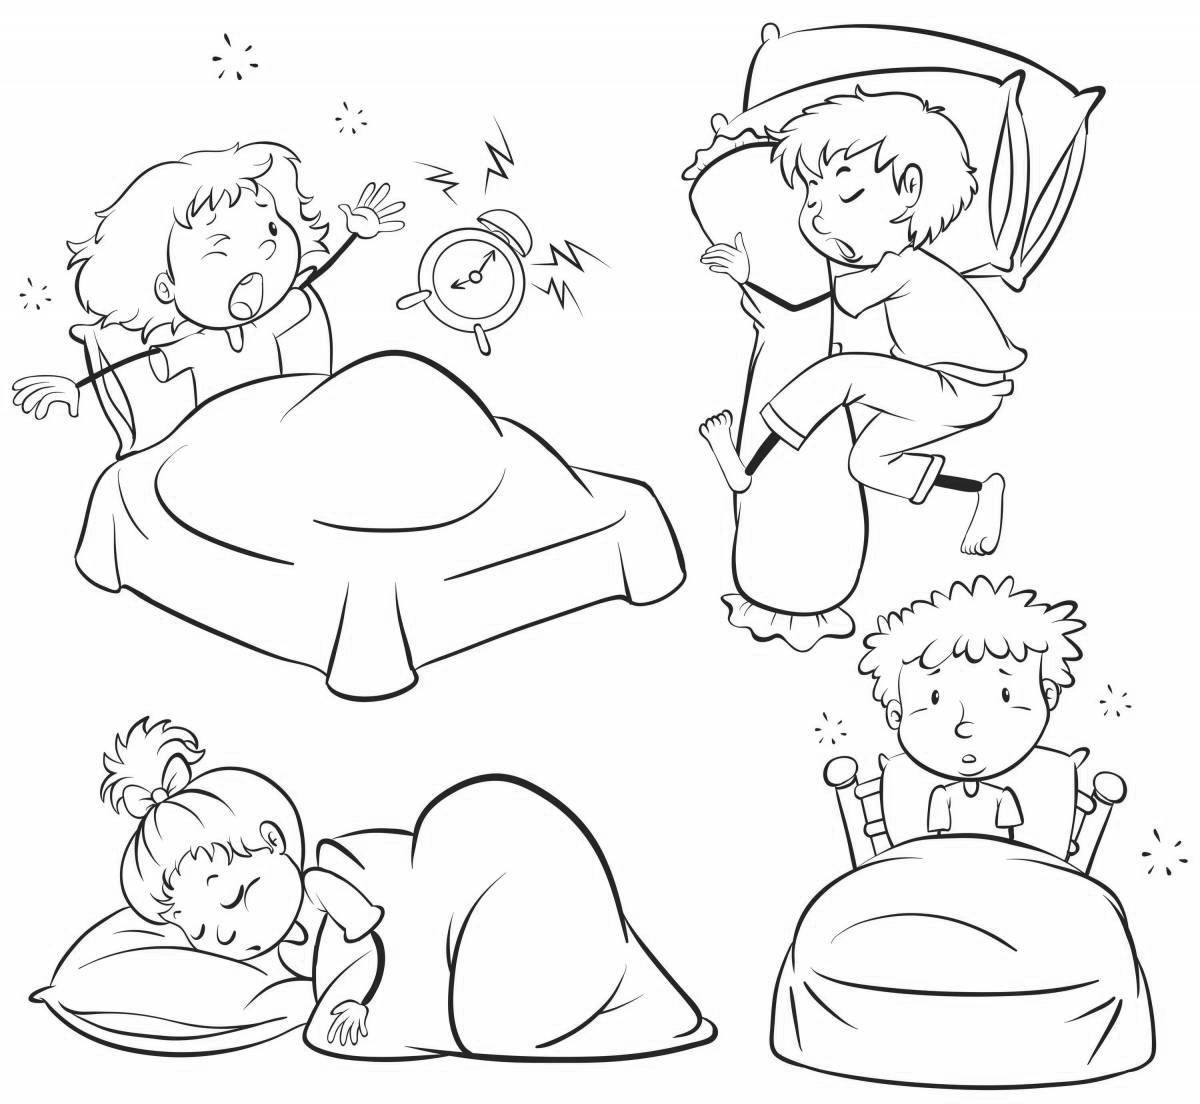 Coloring book blissful sleeping child